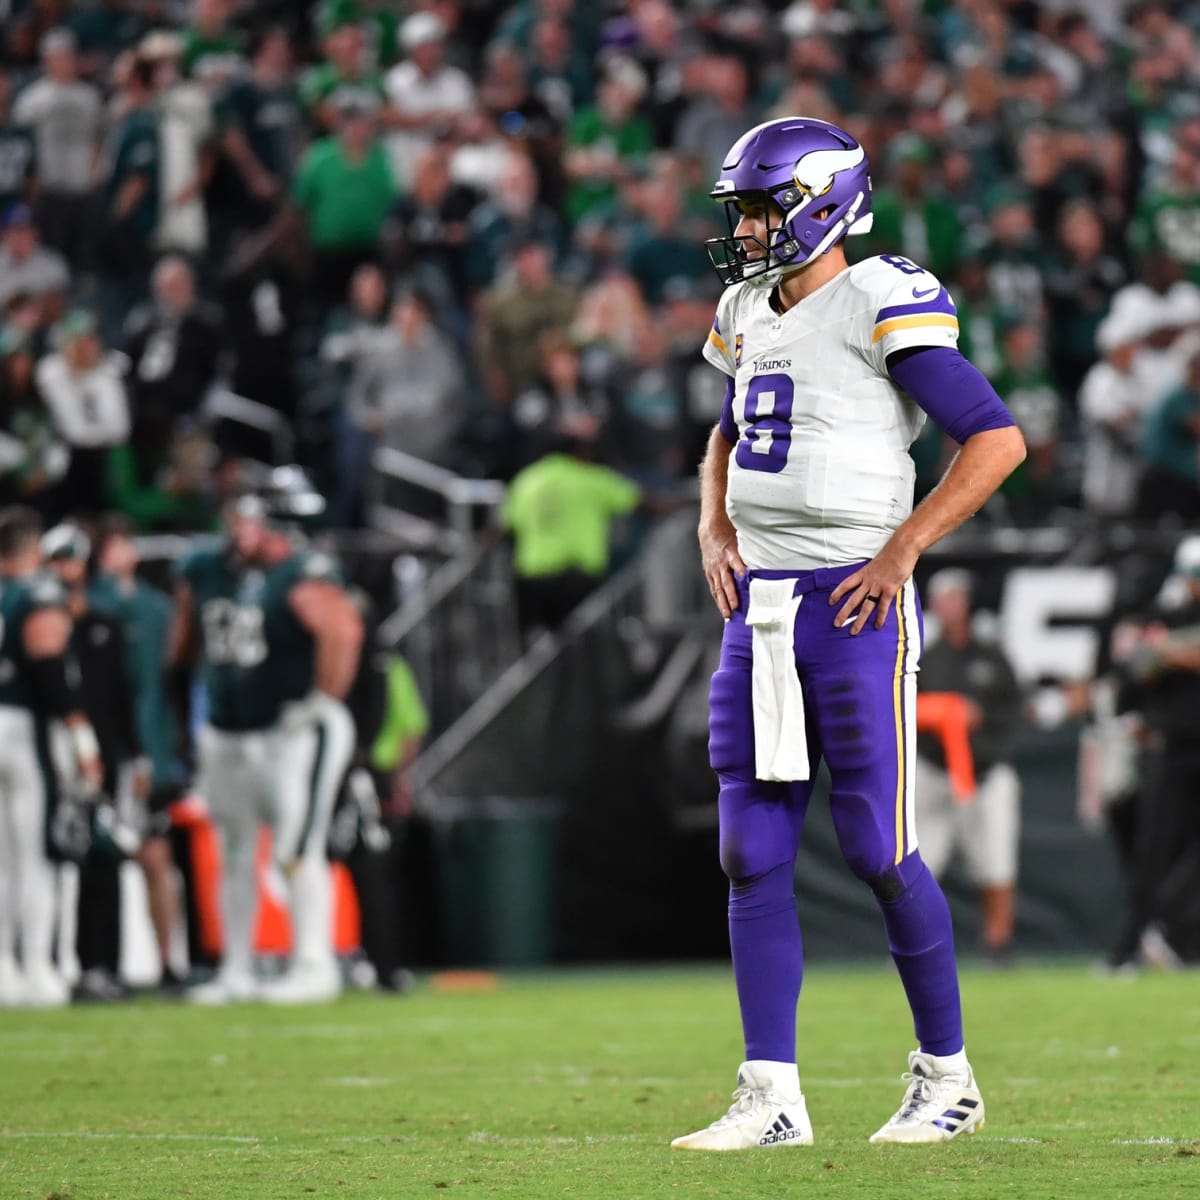 CBS Sports analyst rips Kirk Cousins for performance vs. Eagles